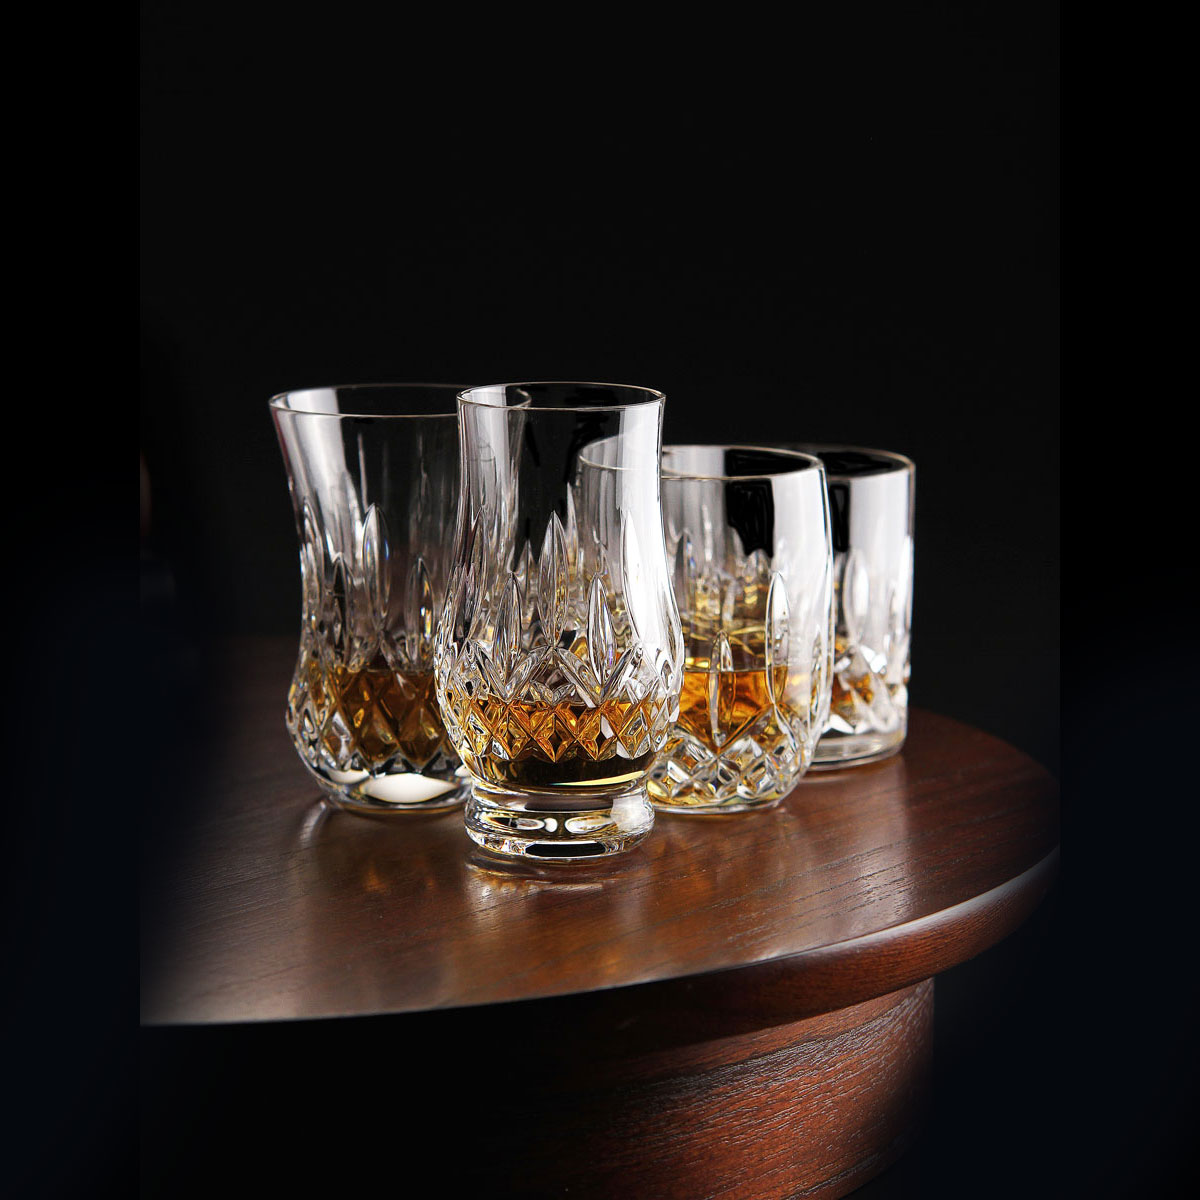 Waterford Crystal Lismore Whiskey Tumblers Mixed Set of Four